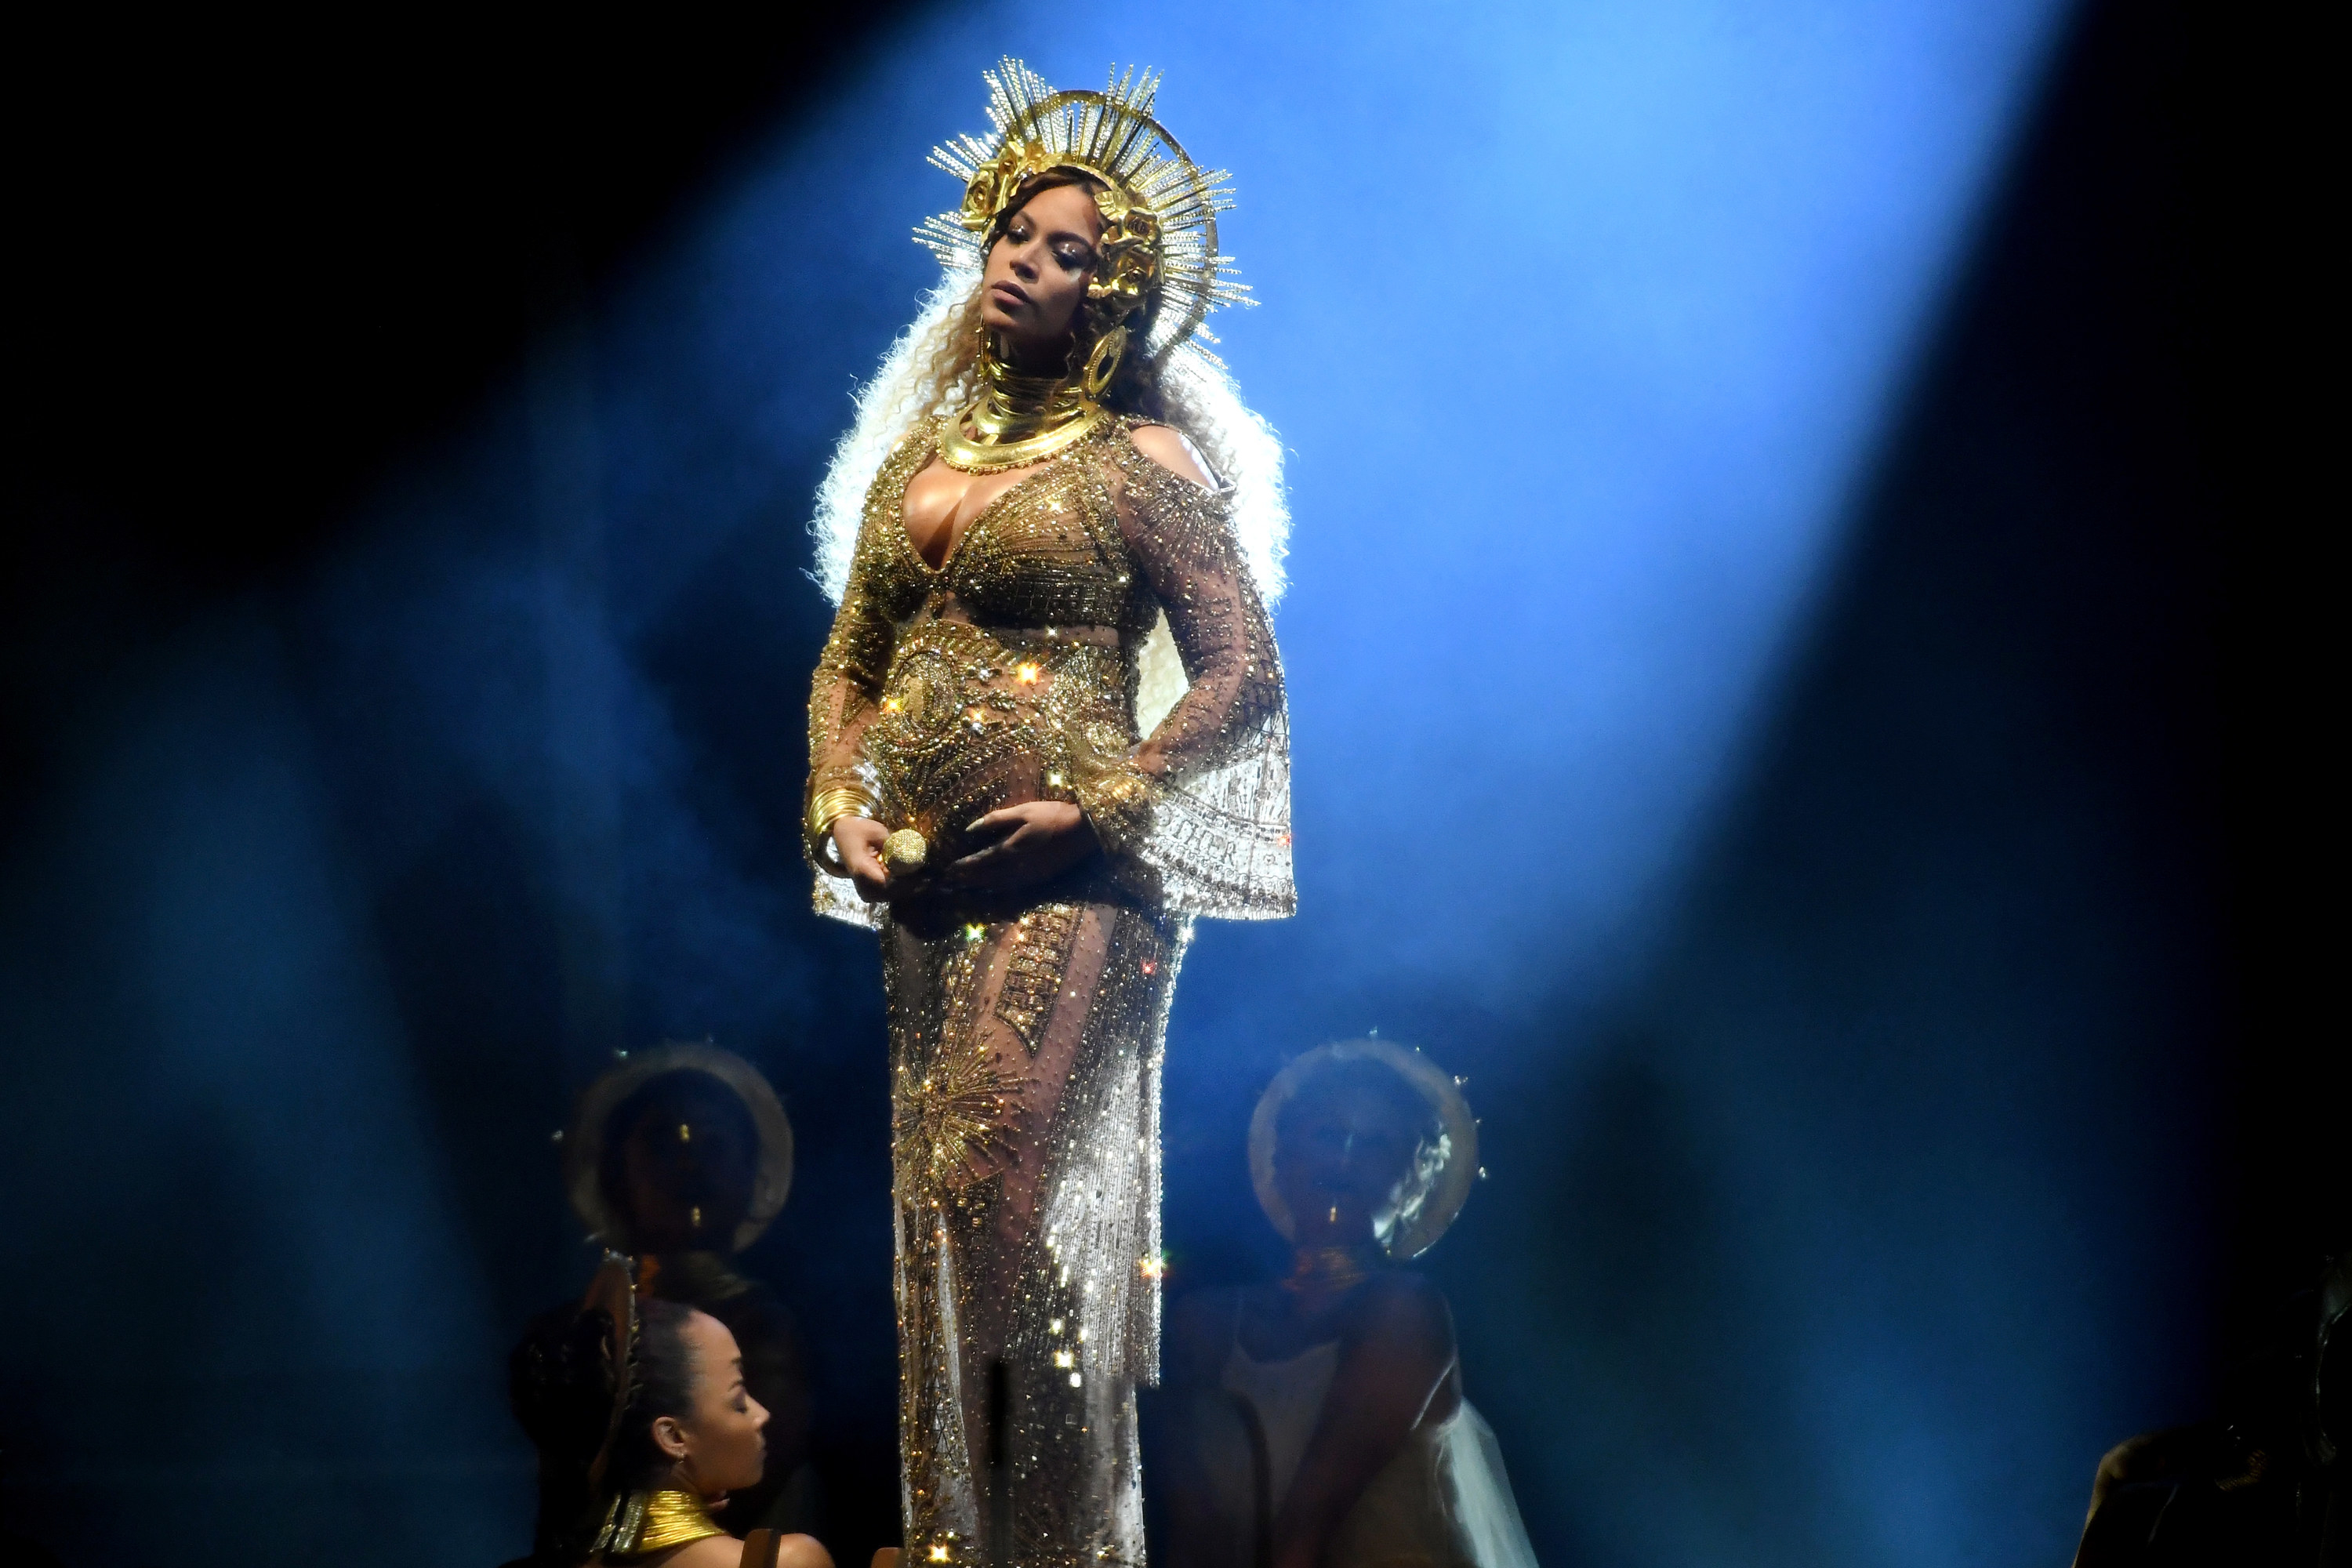 Recording artist Beyonce performs onstage during The 59th GRAMMY Awards at STAPLES Center on February 12, 2017